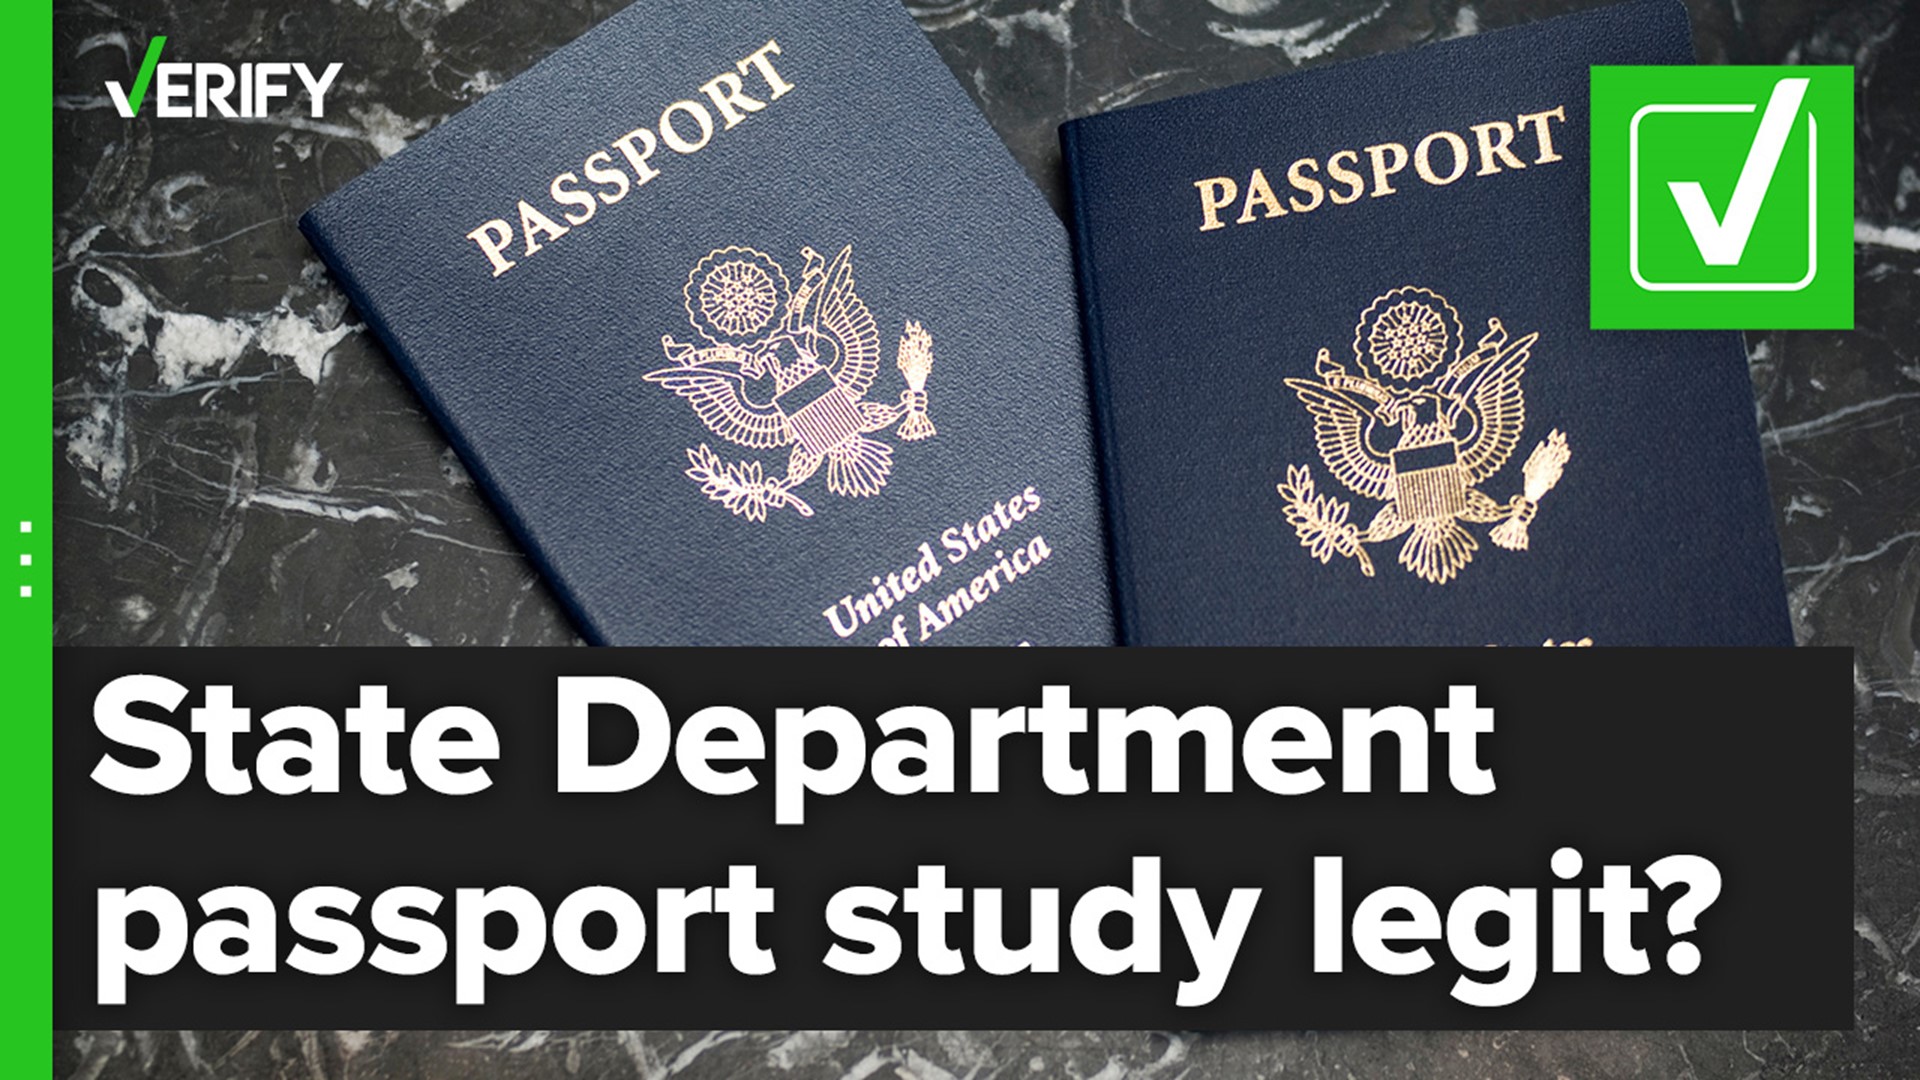 Random recipients get letters every month asking them to complete a survey aimed at determining demand for U.S. passports, the State Department says.